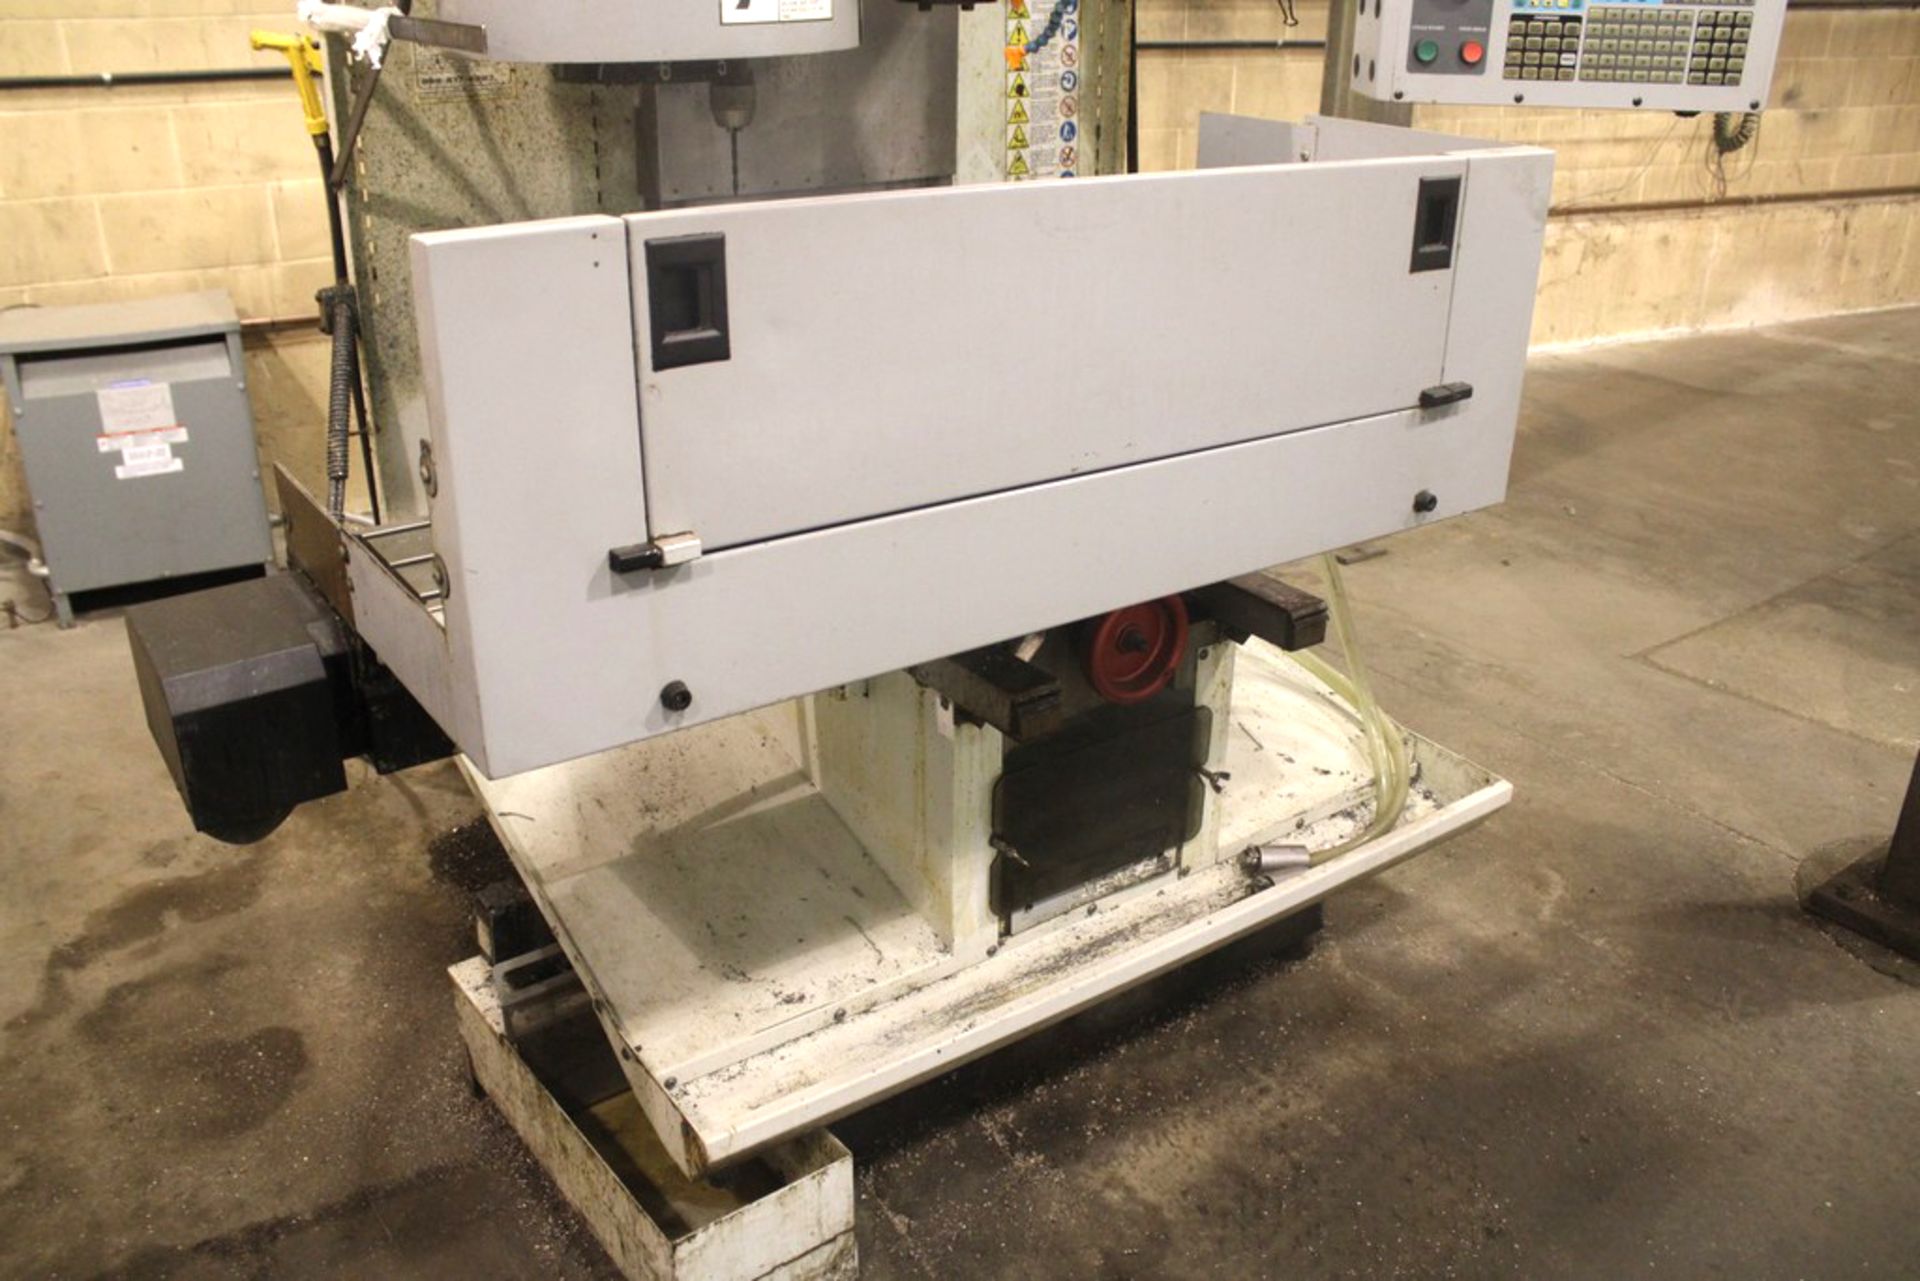 HAAS MODEL TM-1 CNC VERTICAL TOOL ROOM MILL, S/N 46006 (NEW 2005), 30” X-AXIS TRAVEL, 12” Y-AXIS - Image 3 of 9